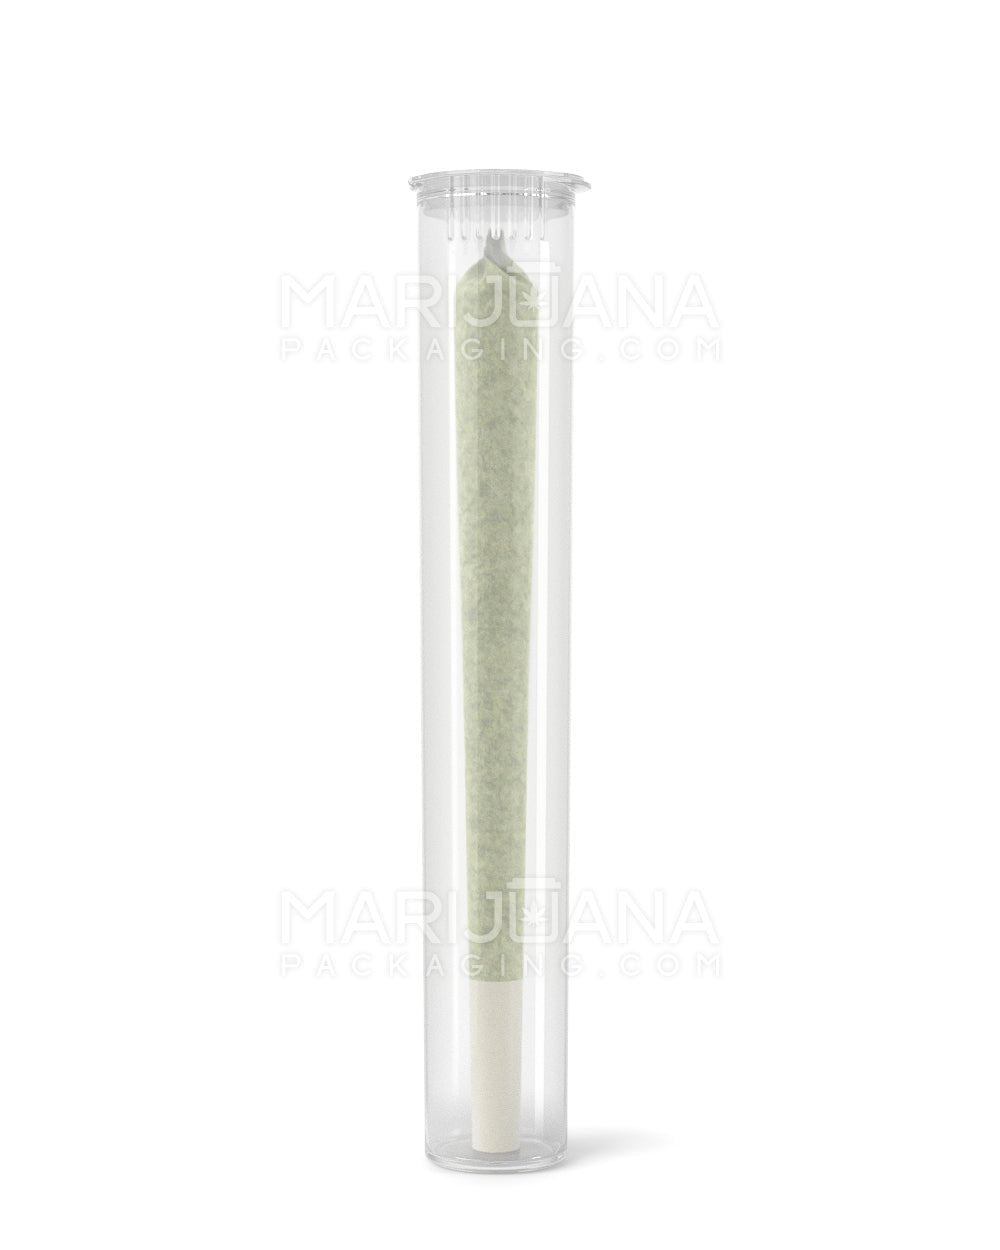 Child Resistant | King Size Pop Top Plastic PCR Pre-Roll Tubes (Open) | 116mm - Clear - 1000 Count - 2